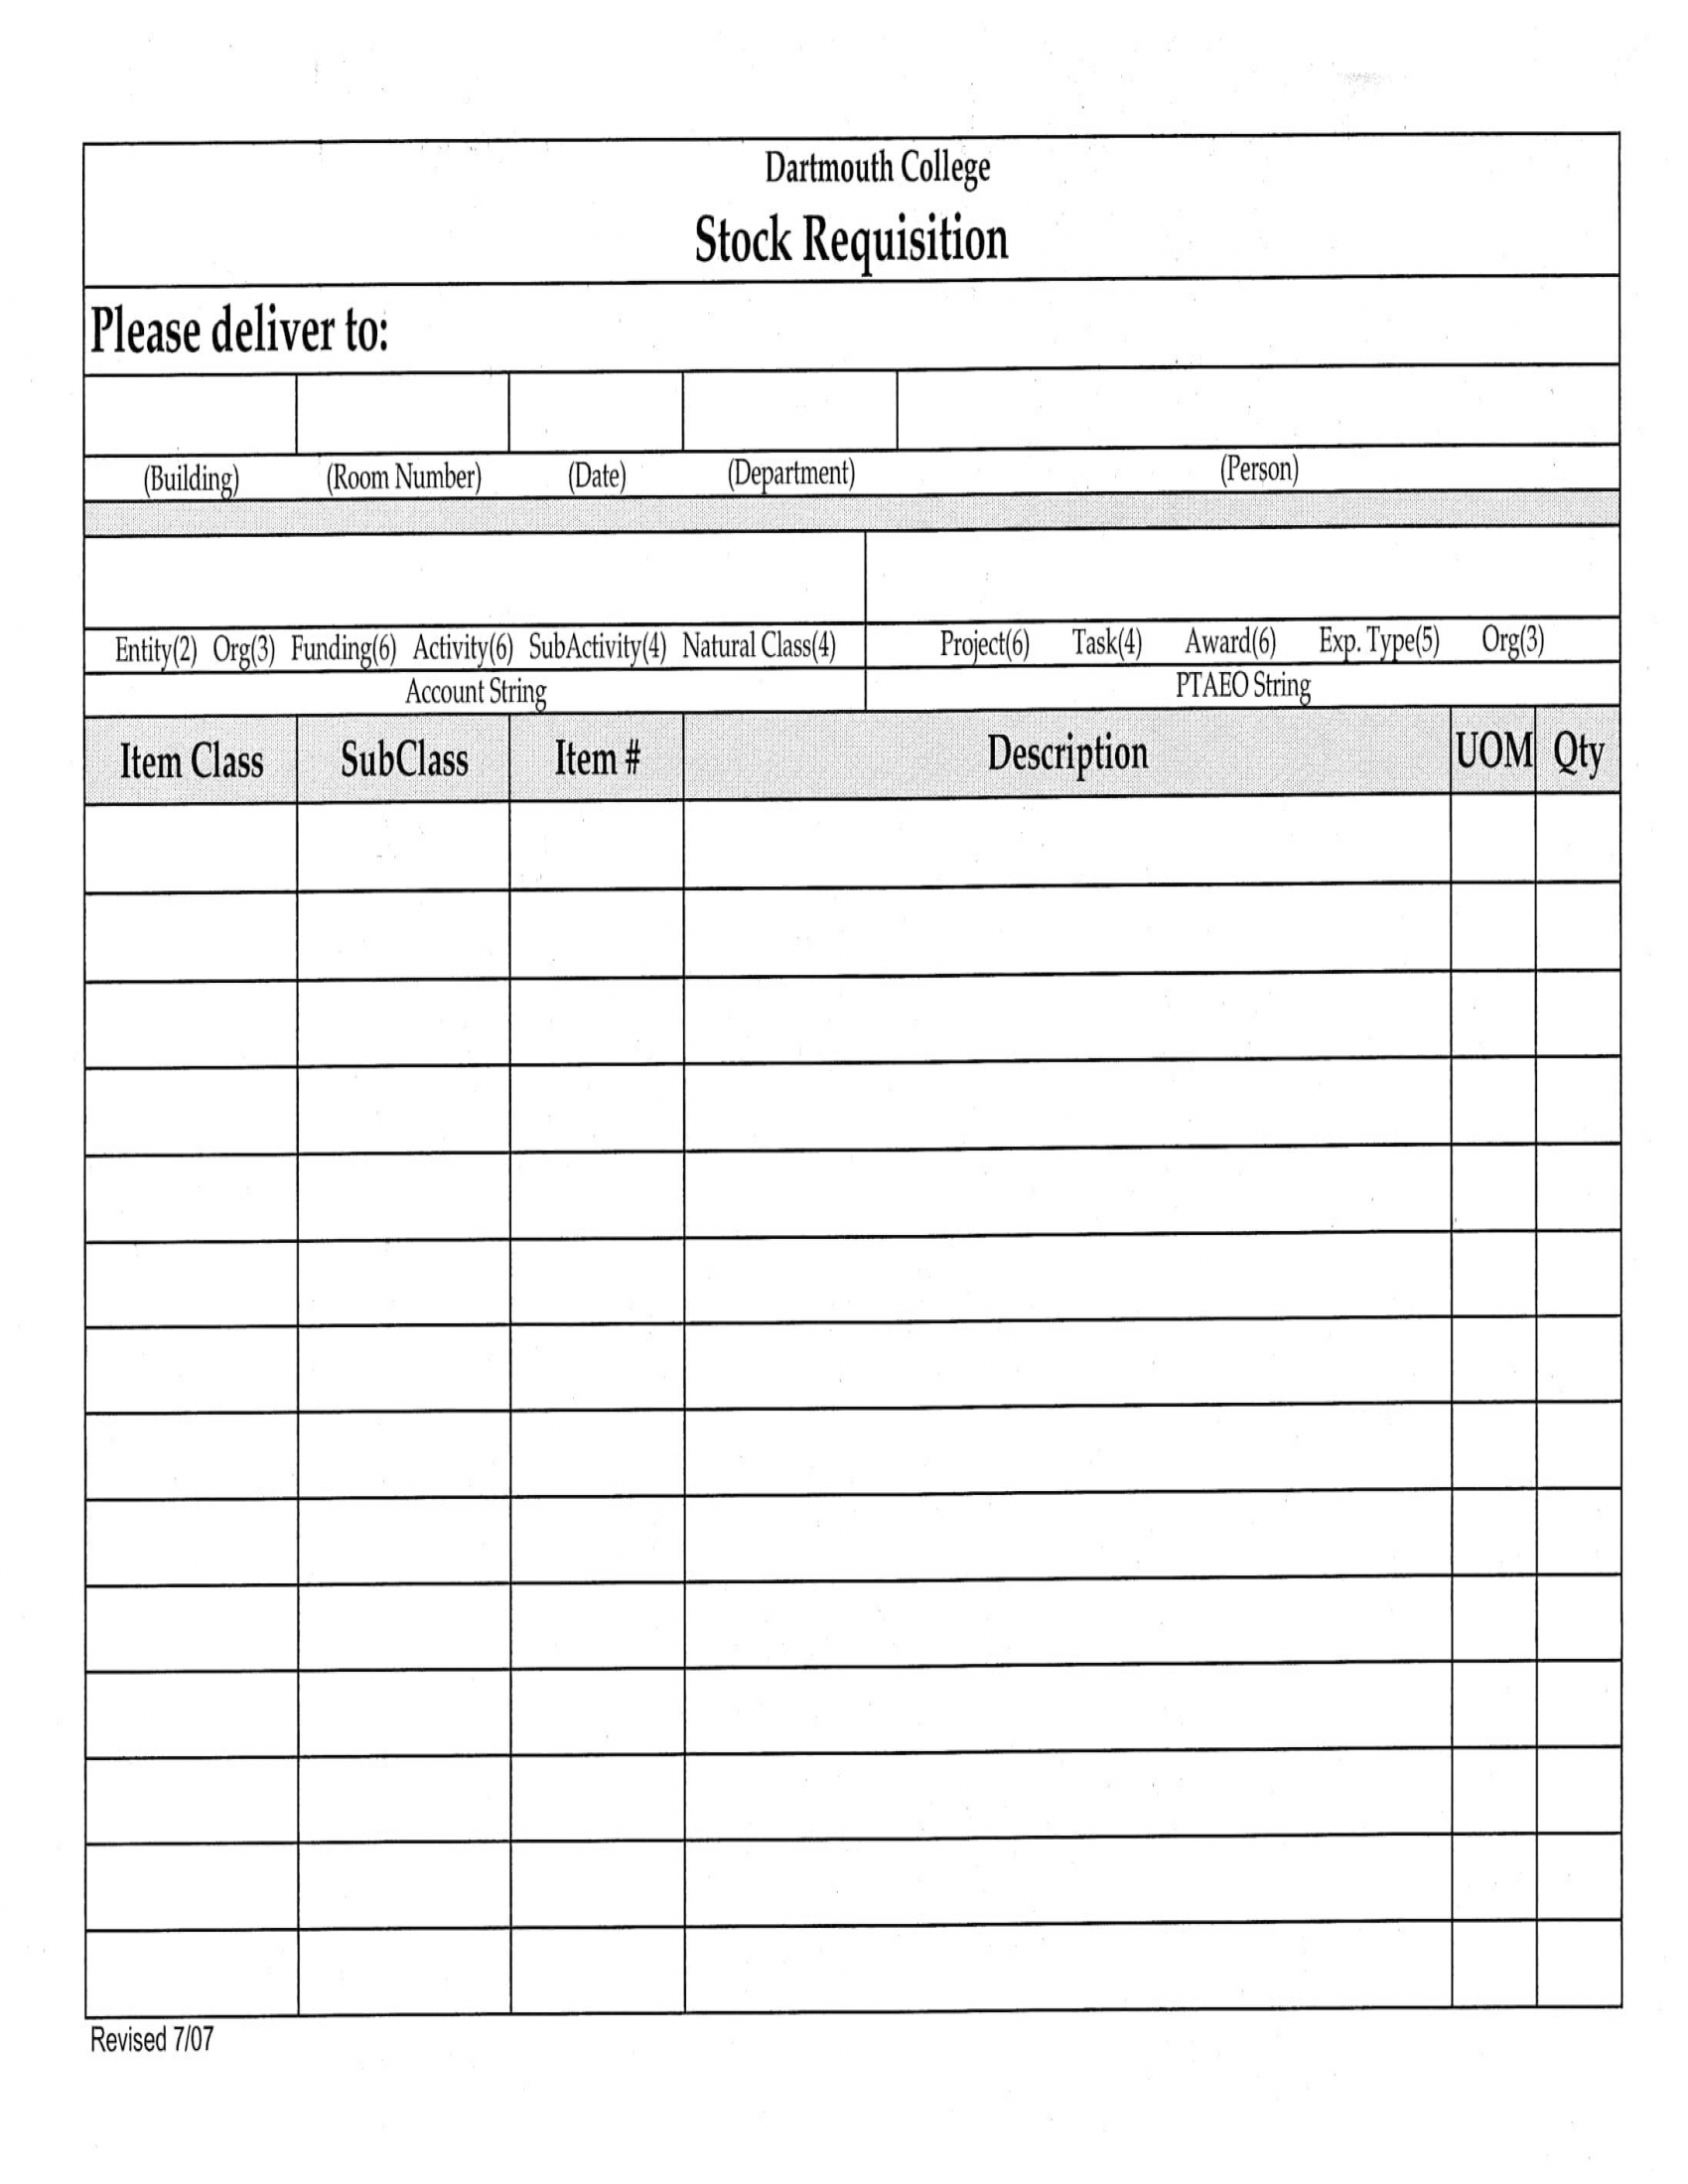 sample stock requisition form 1